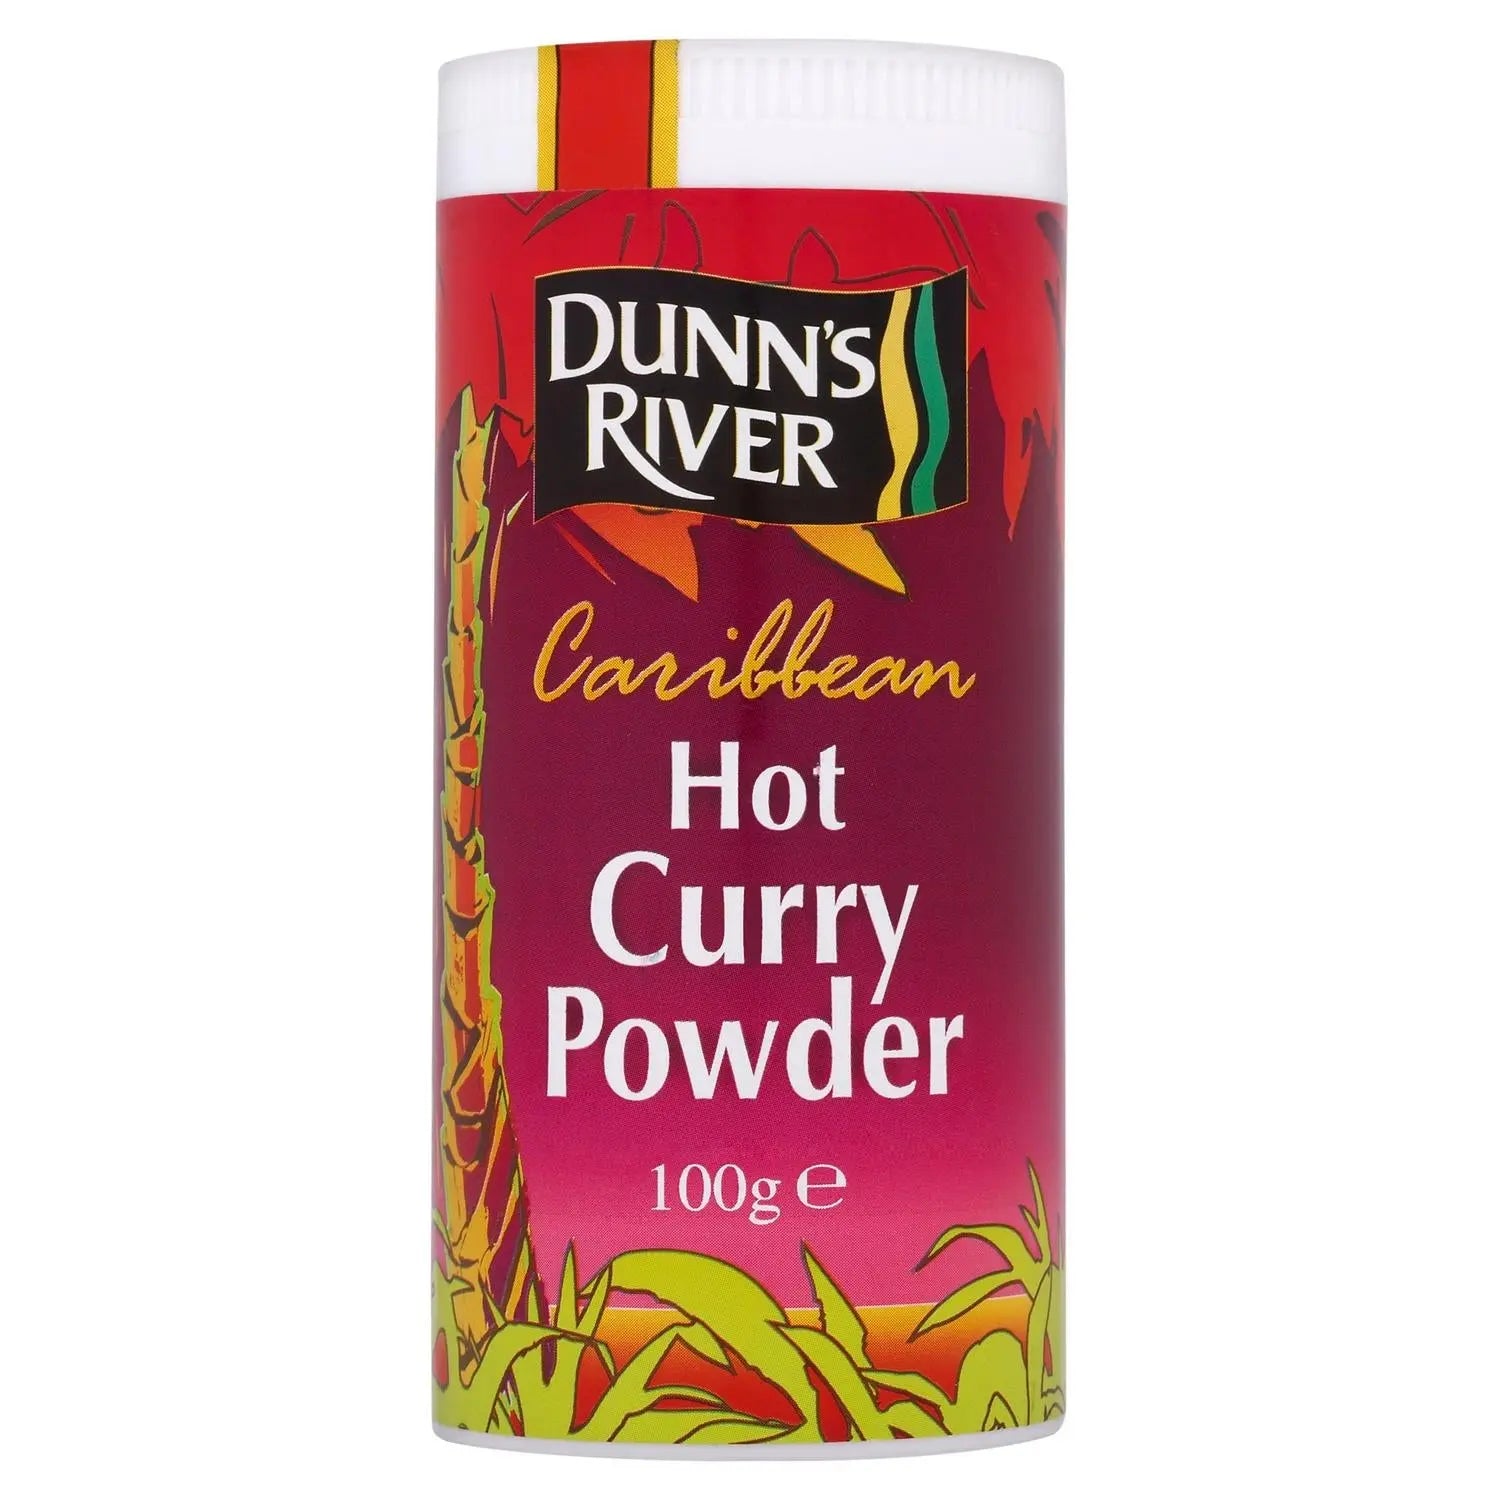 Dunns’ River Hot Curry Powder 100g (12 in Case)